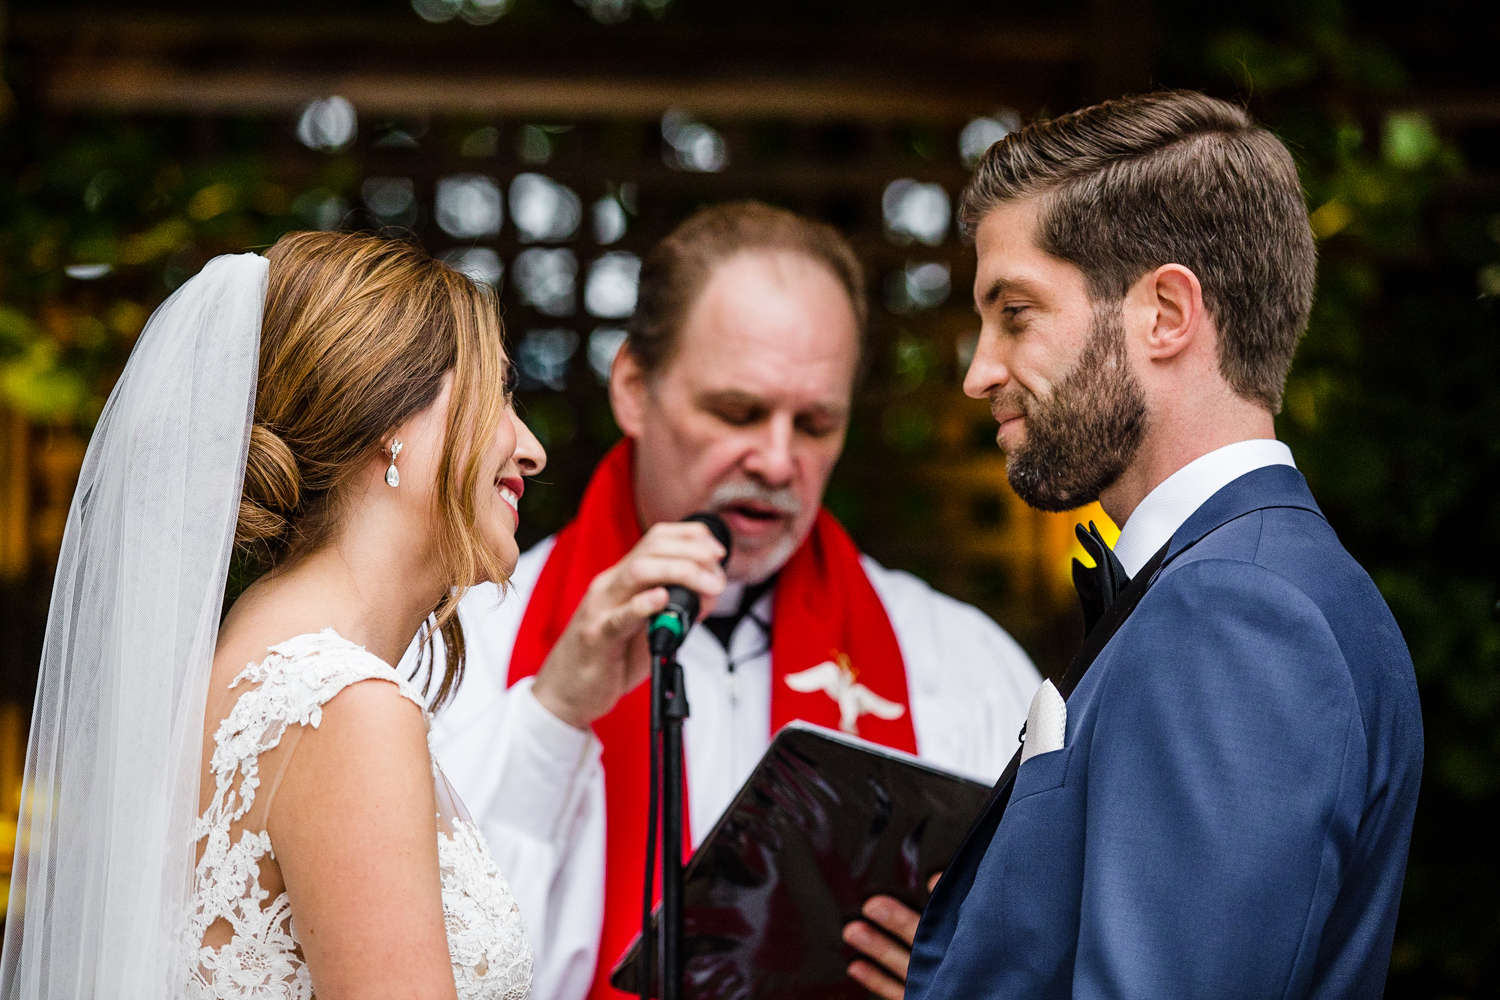 A bride and groom share their wedding vows during a Gallery Marchetti wedding ceremony.